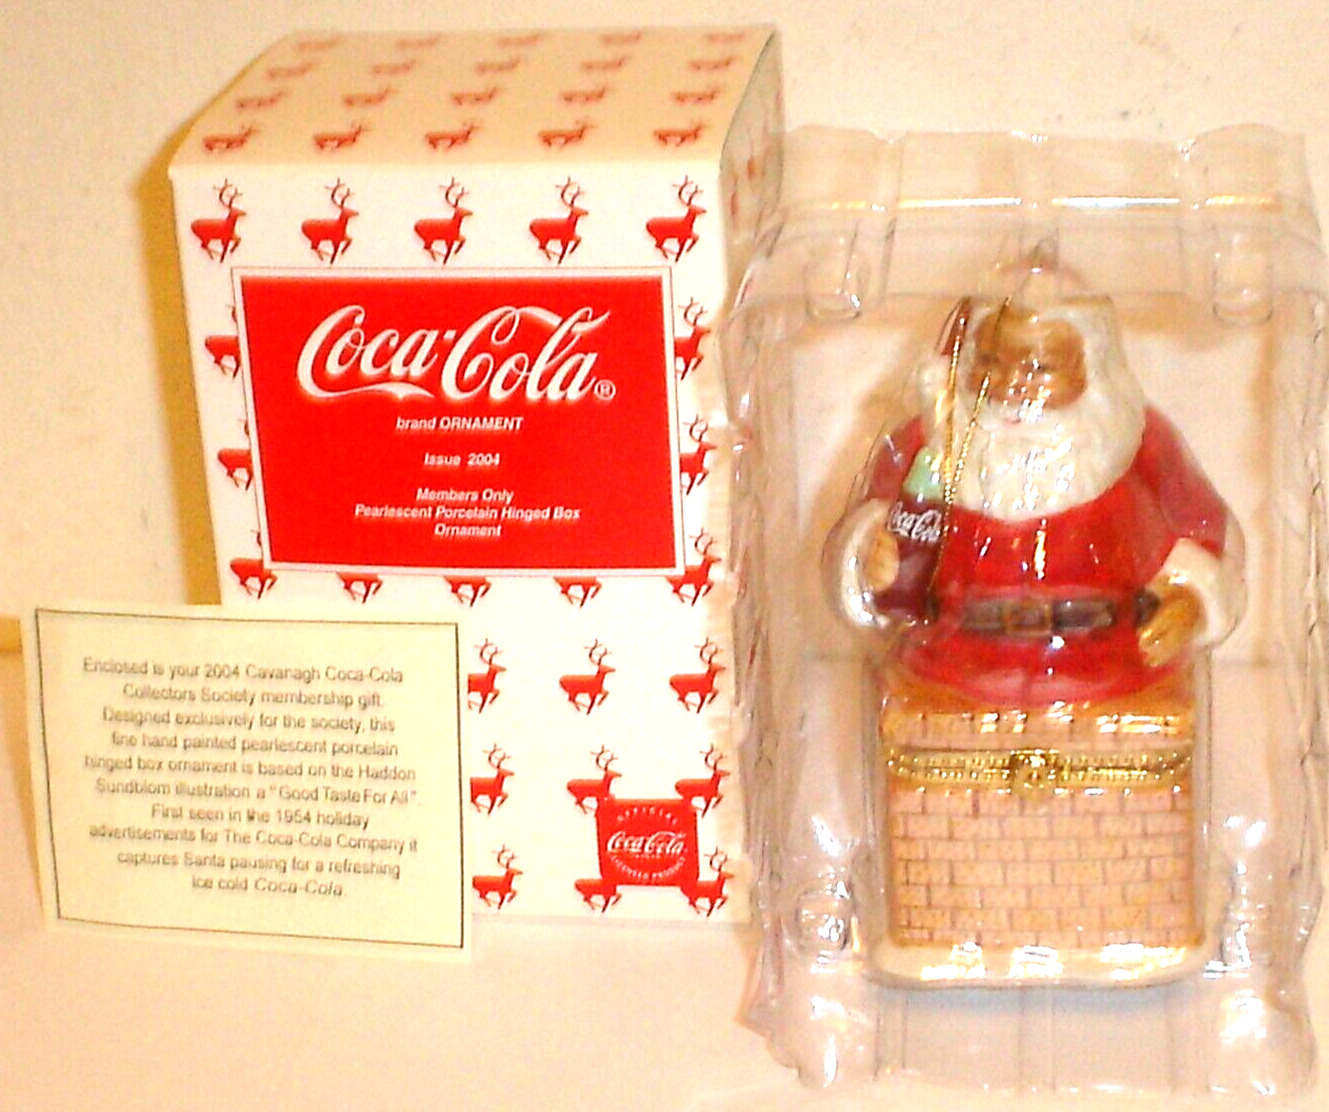 2004 Coca-Cola Members Only Pearlescent Porcelain Hinged Box Santa Ornament New